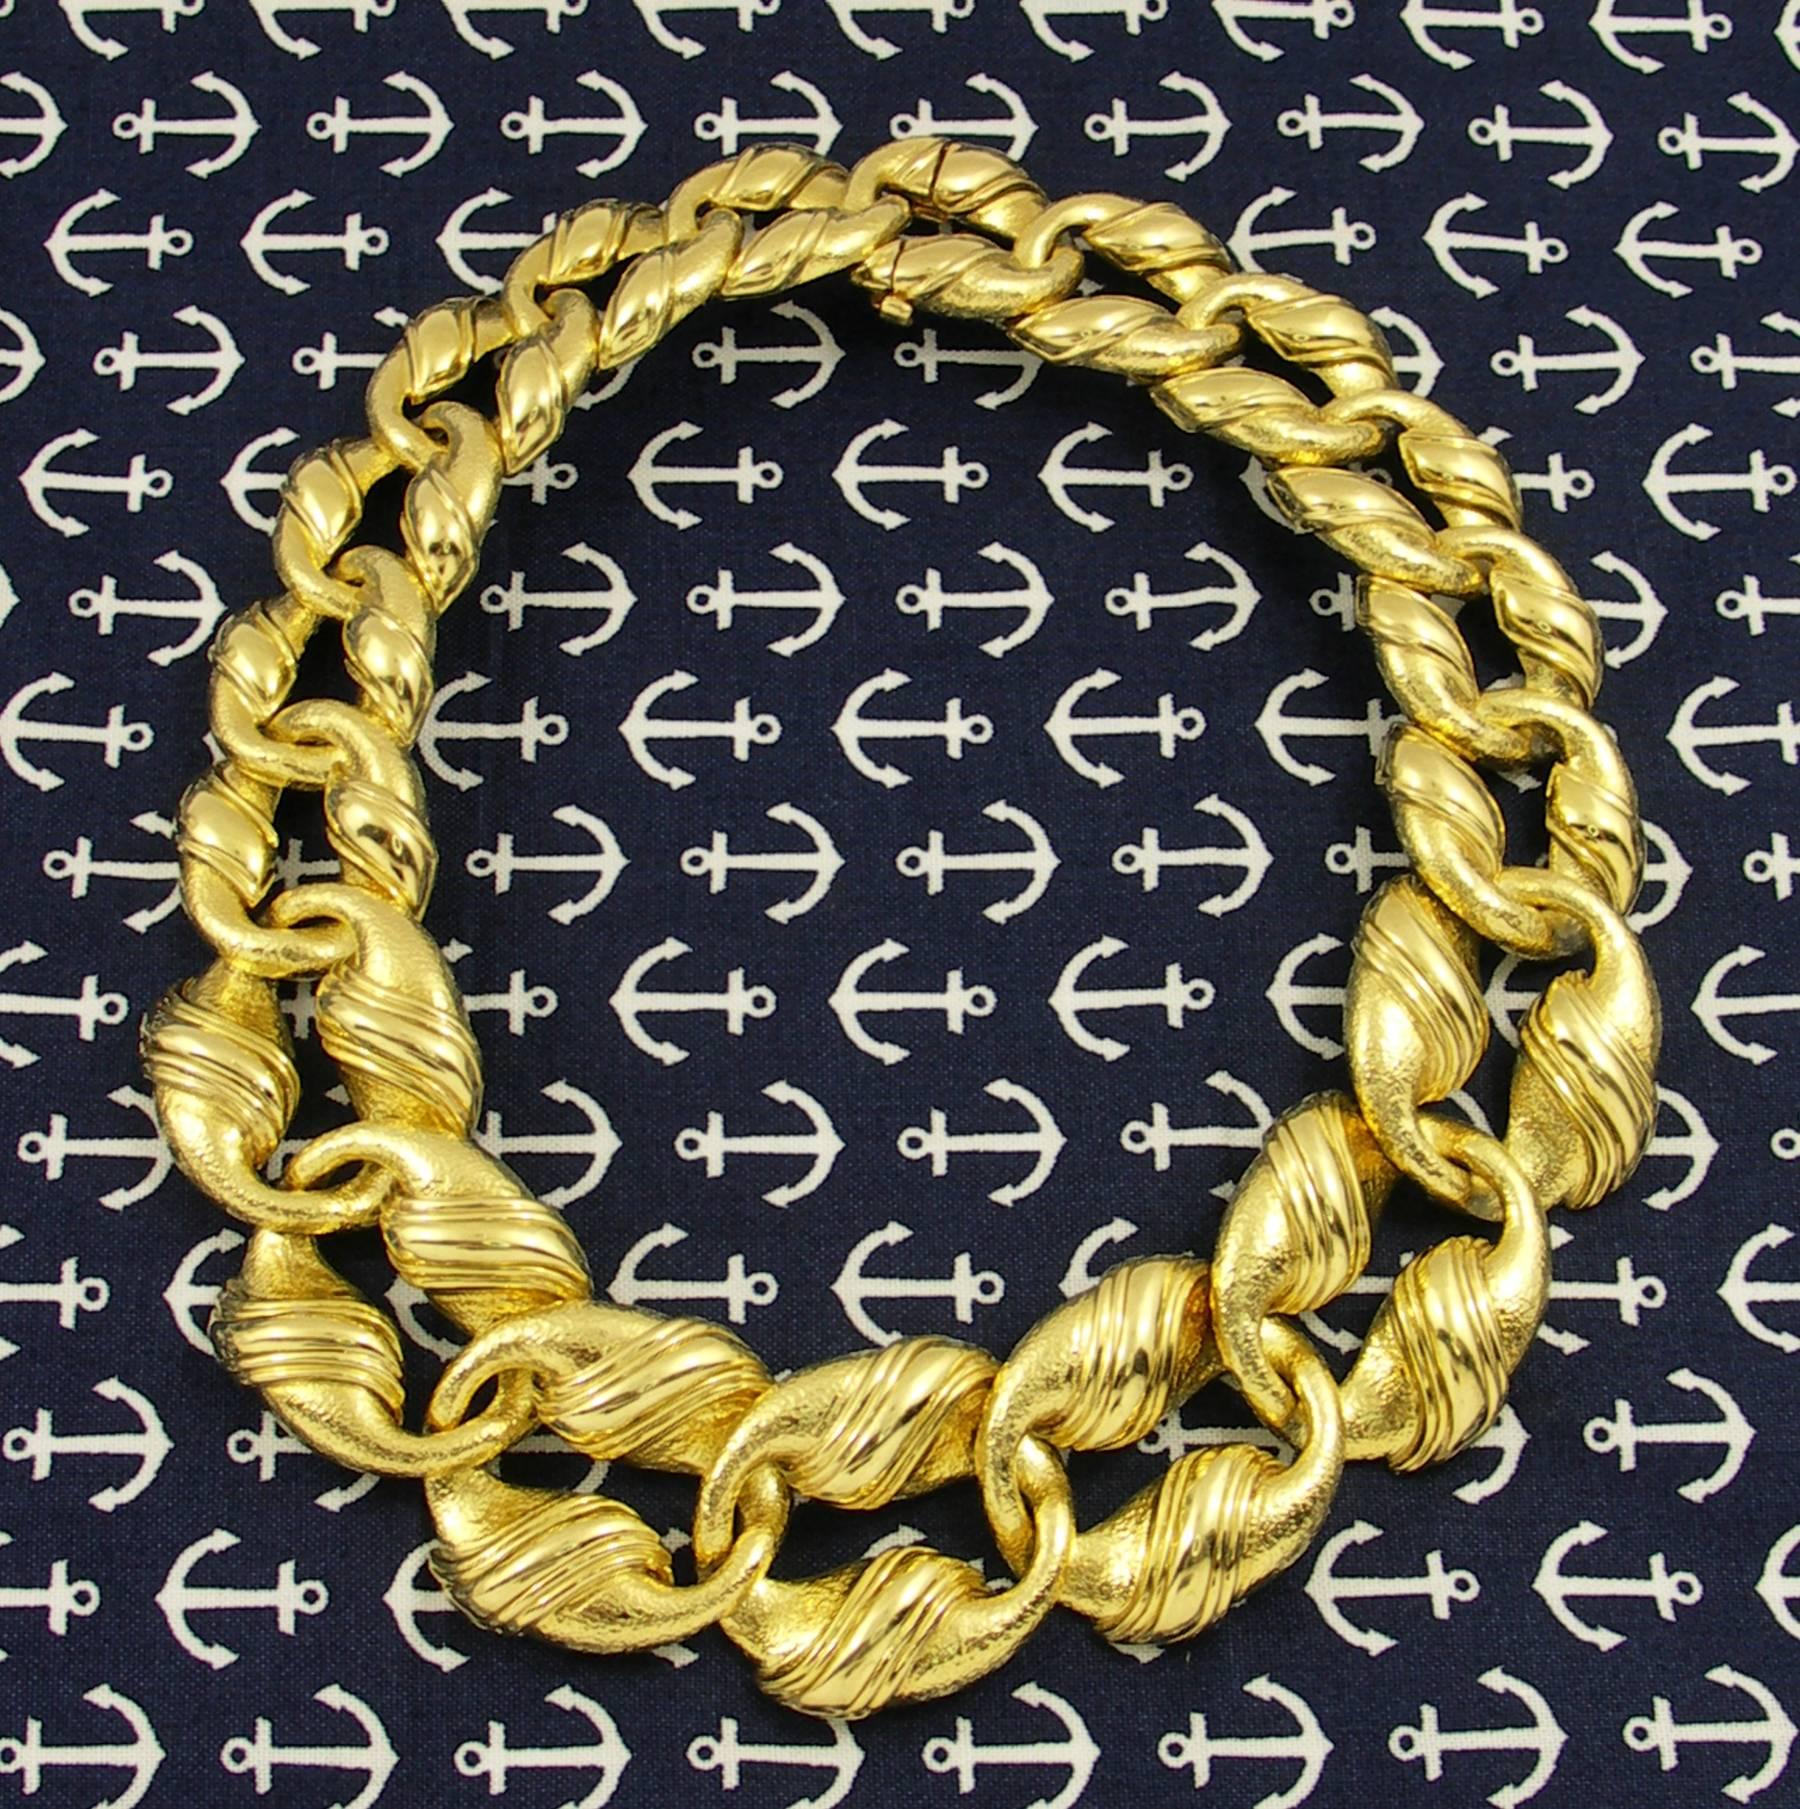 18kt., gold link necklace, with high polished and hammered finish, graduating in width from 1 inch to 1 1/4 inches, inside circumference is 13 1/2 inches, signed, and numbered David Webb. Weight 219 grams.